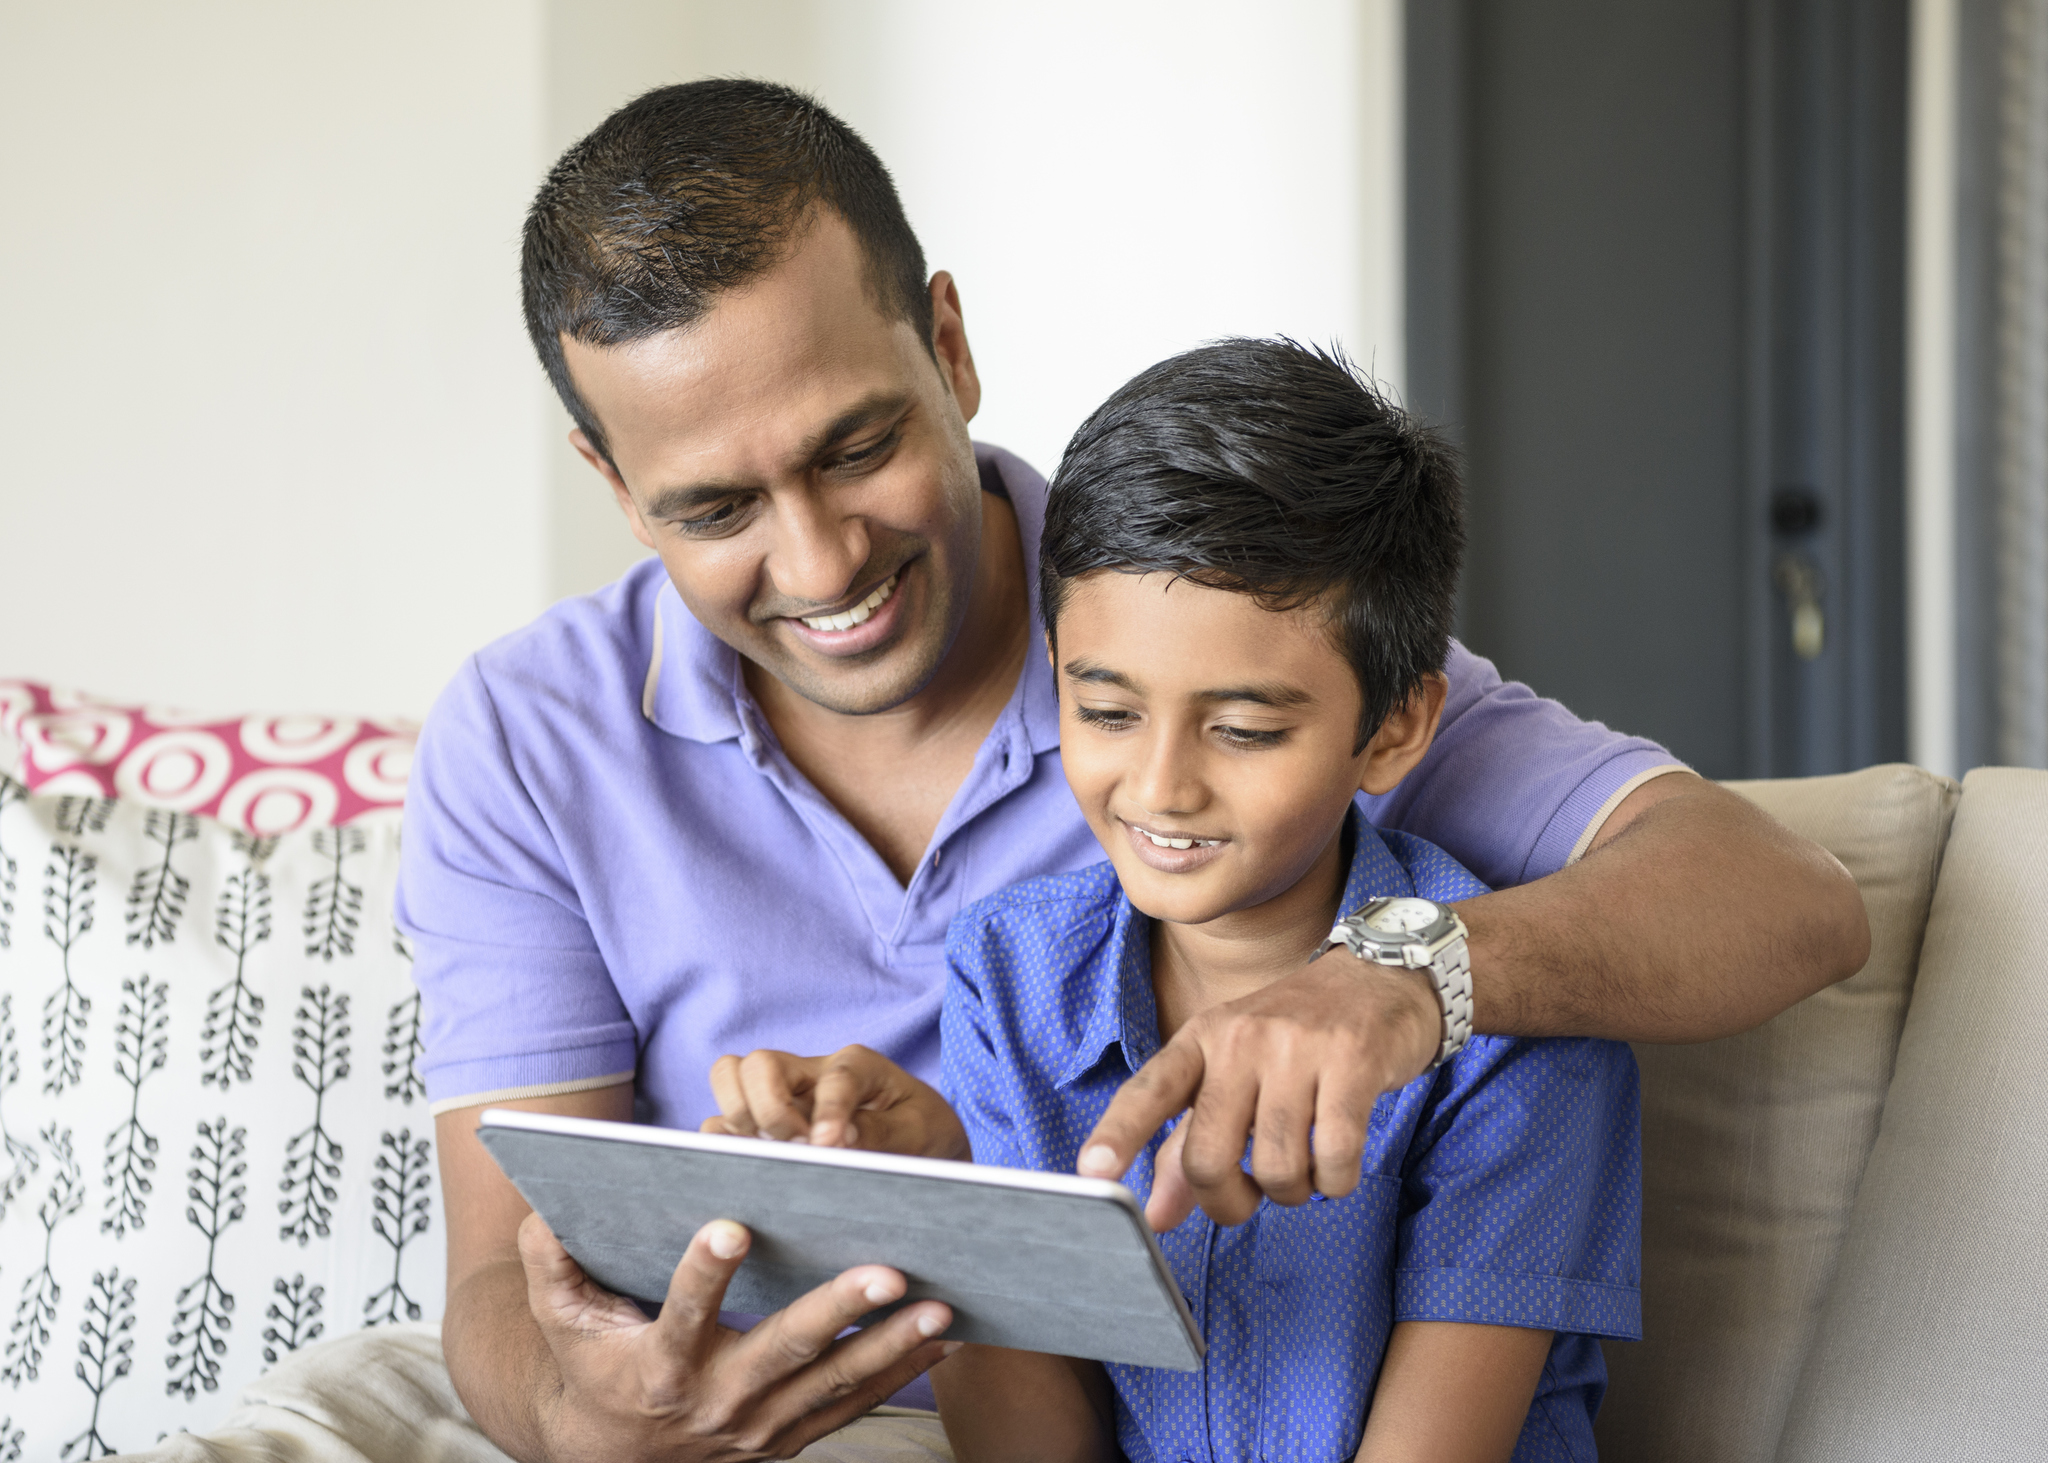 Father and son on sofa using a tablet